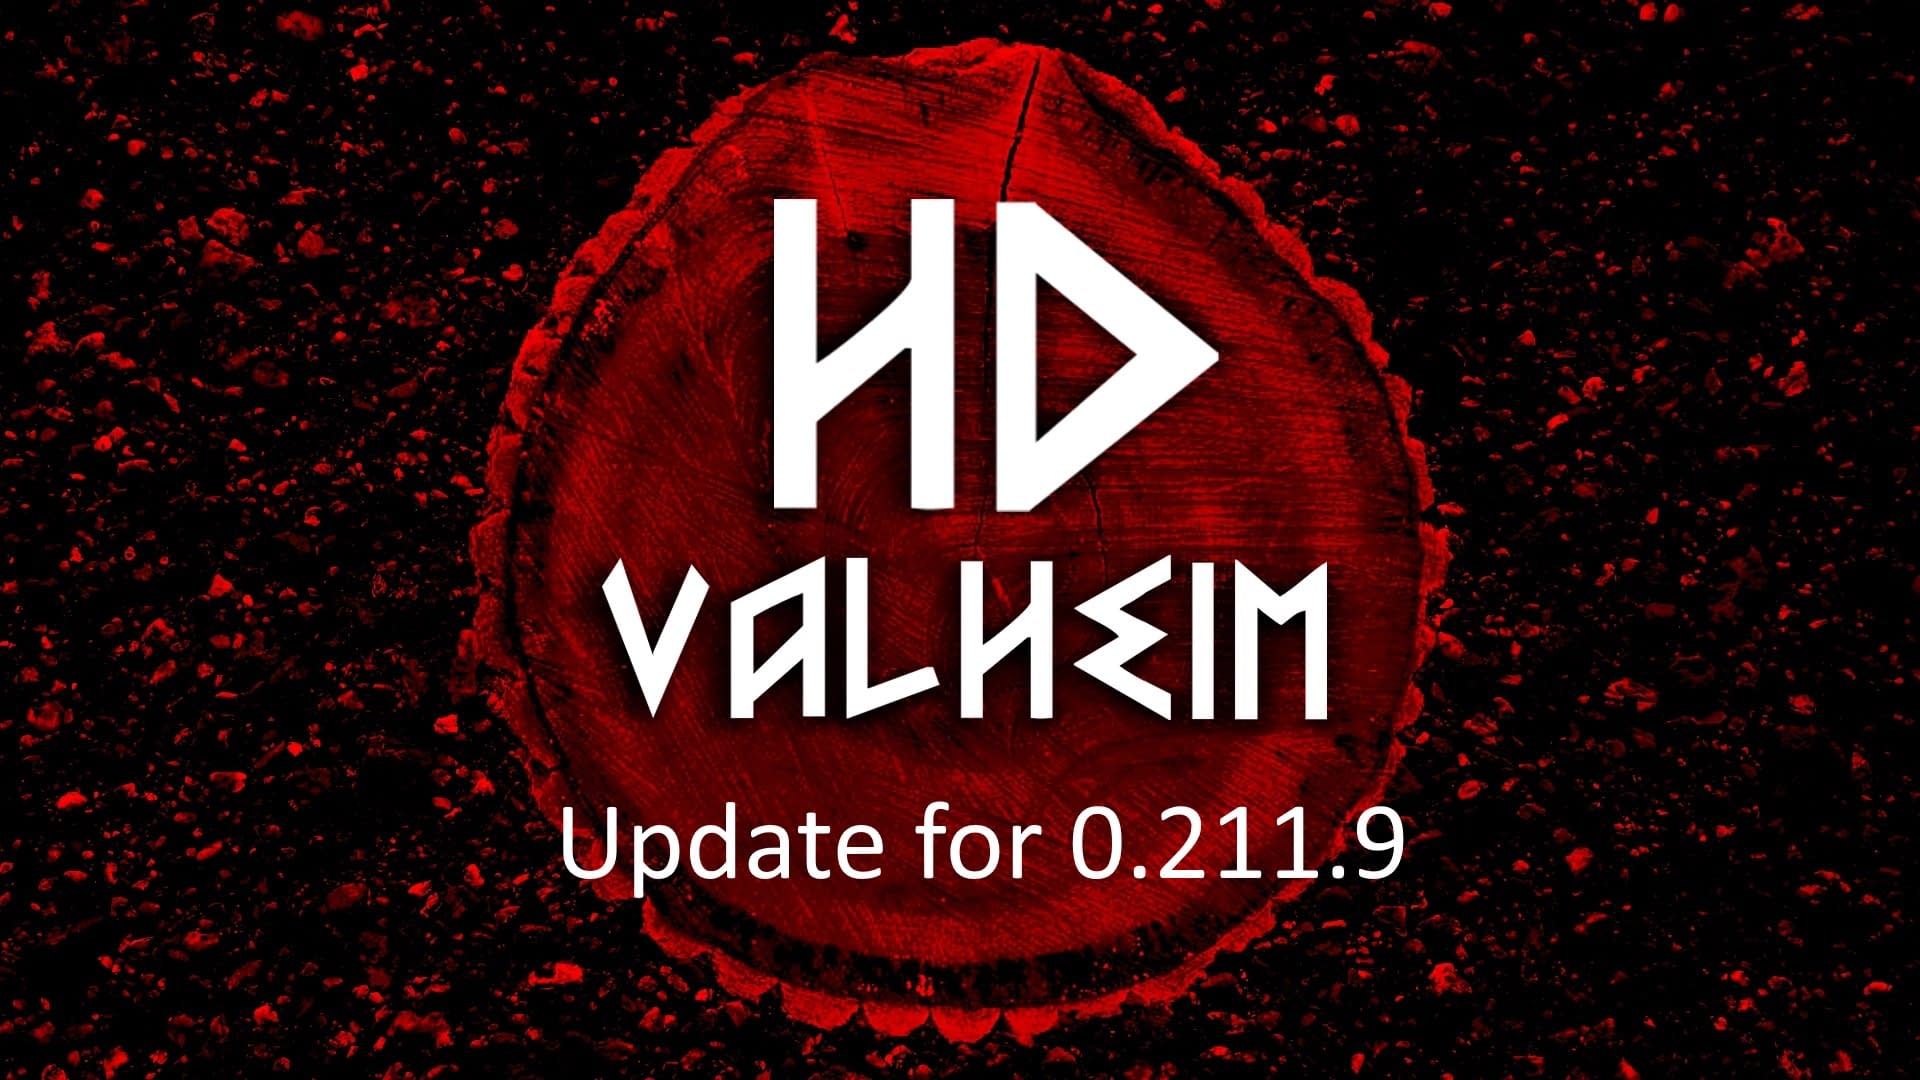 HD Texture Pack Compatible with the Latest Version of Valheim Released